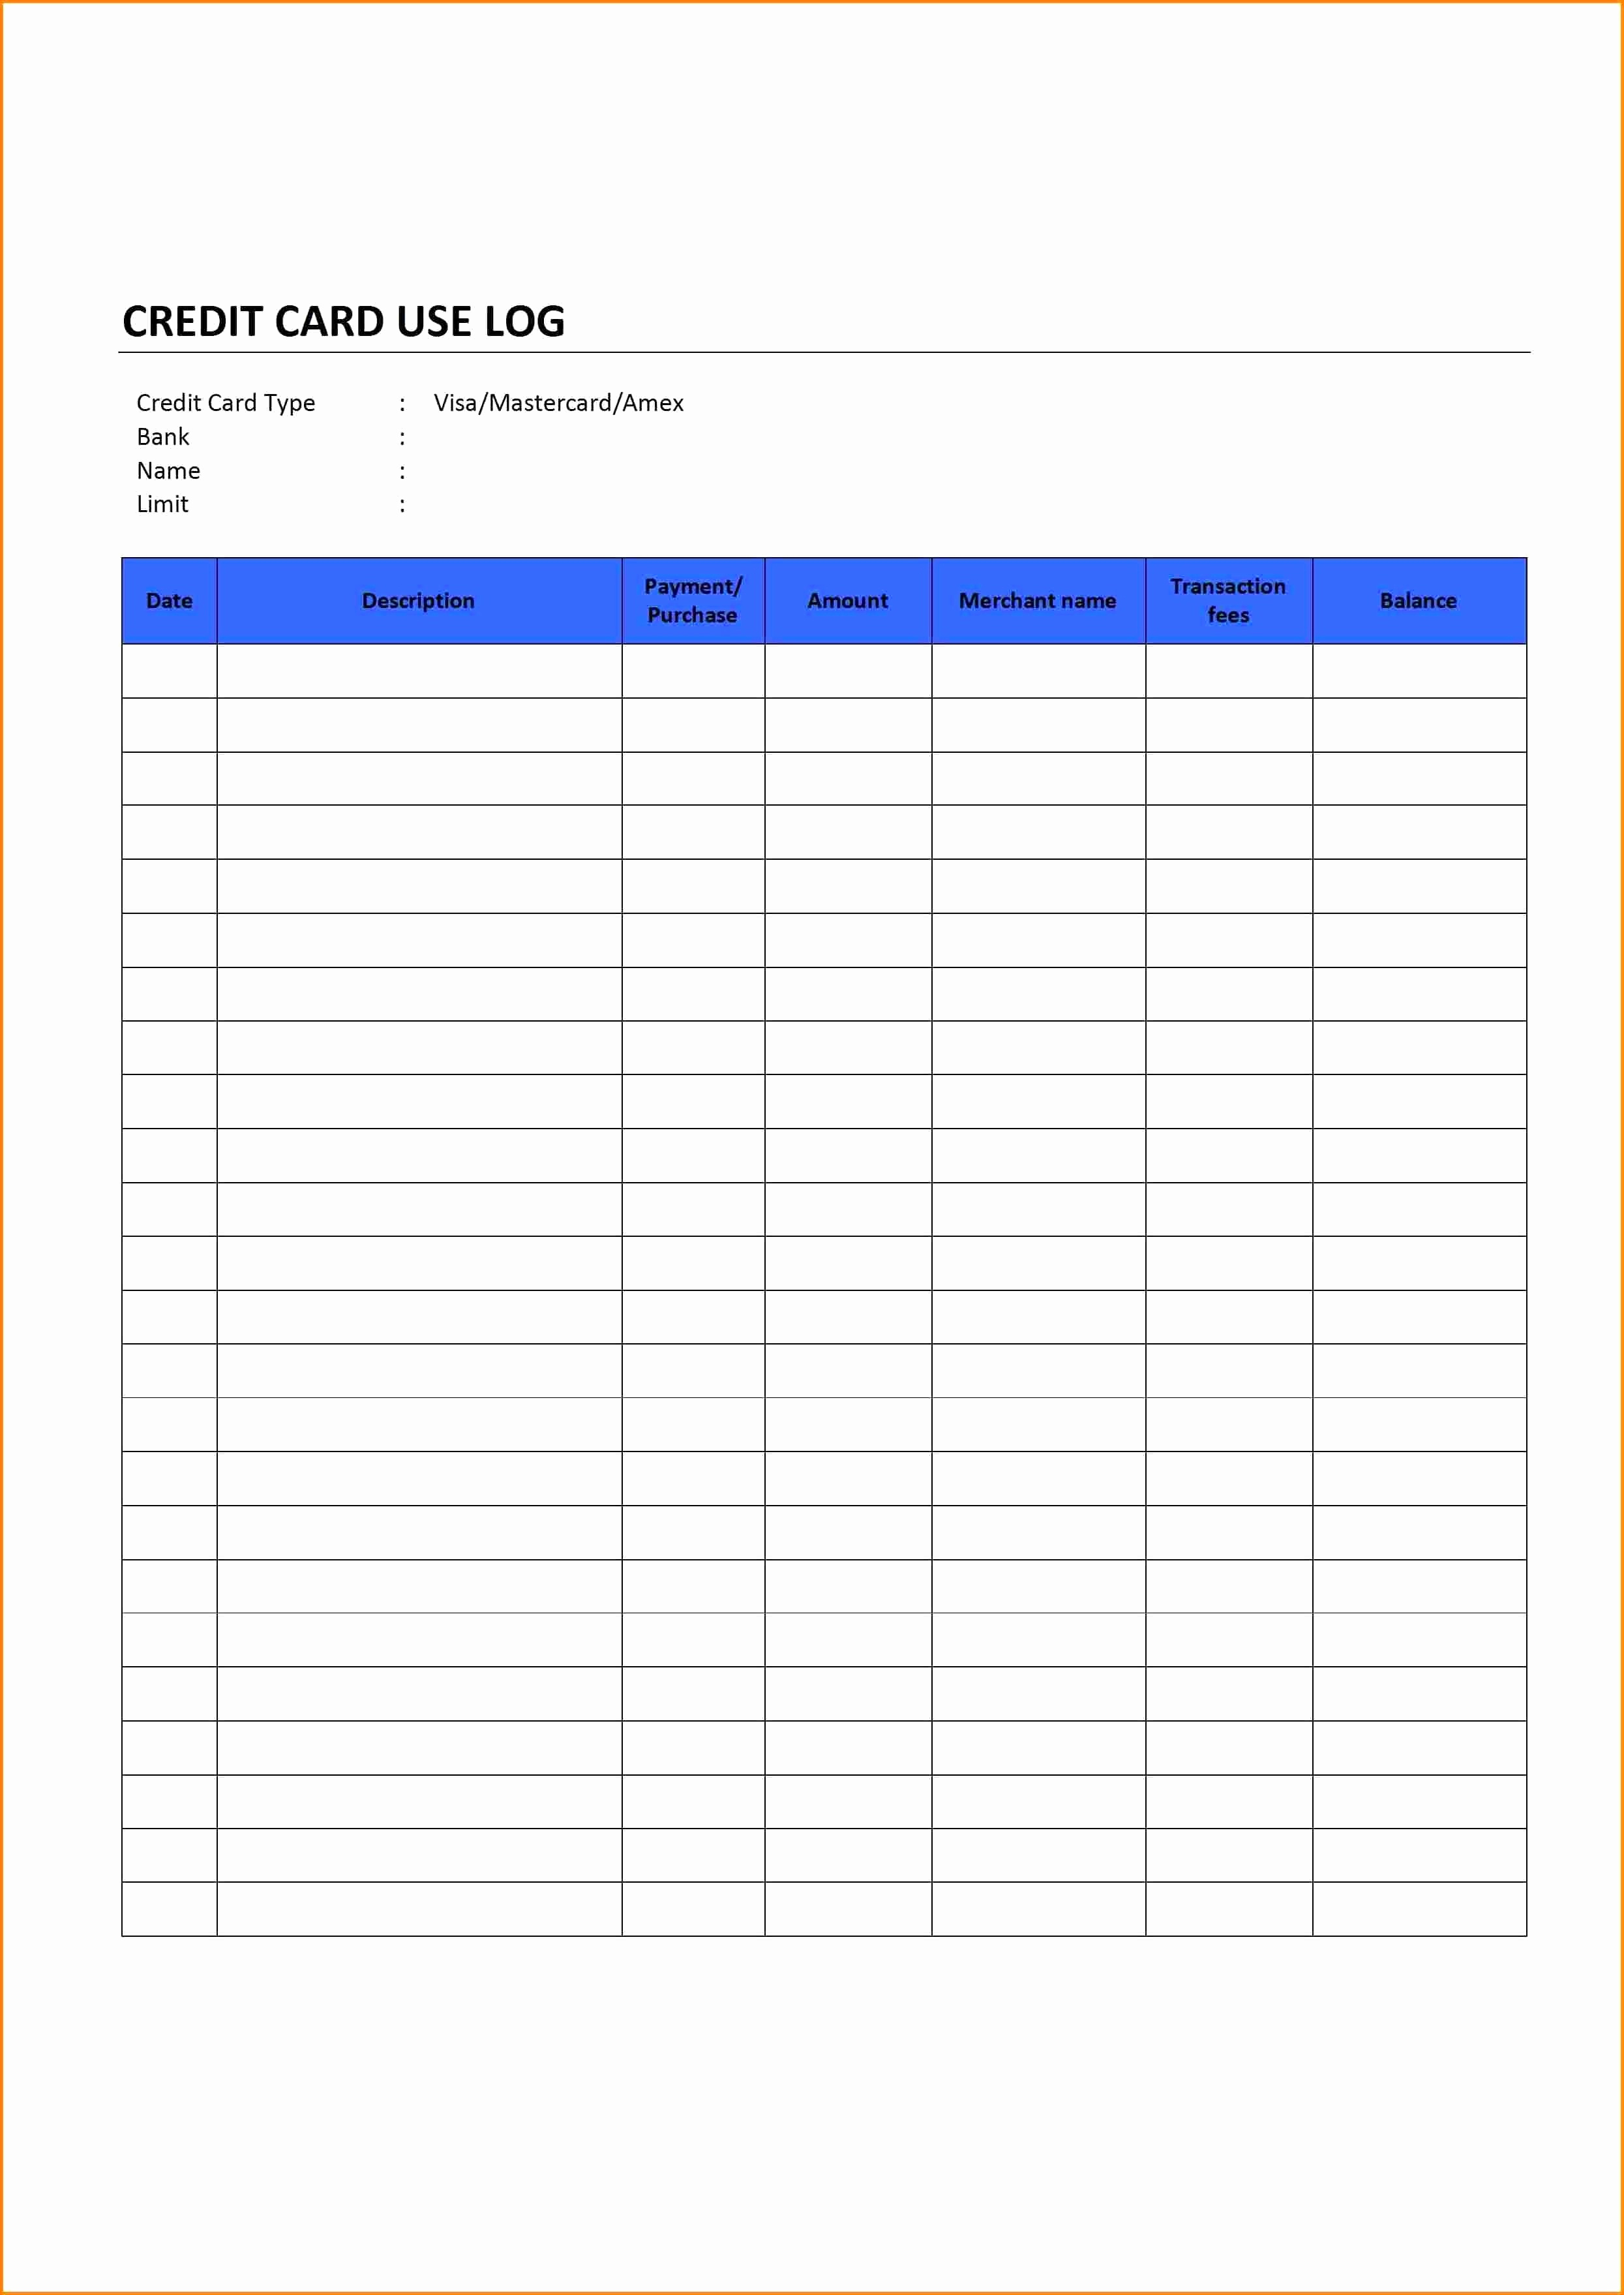 Coupon Database Spreadsheet For Coupon Database Spreadsheet  Spreadsheet Collections